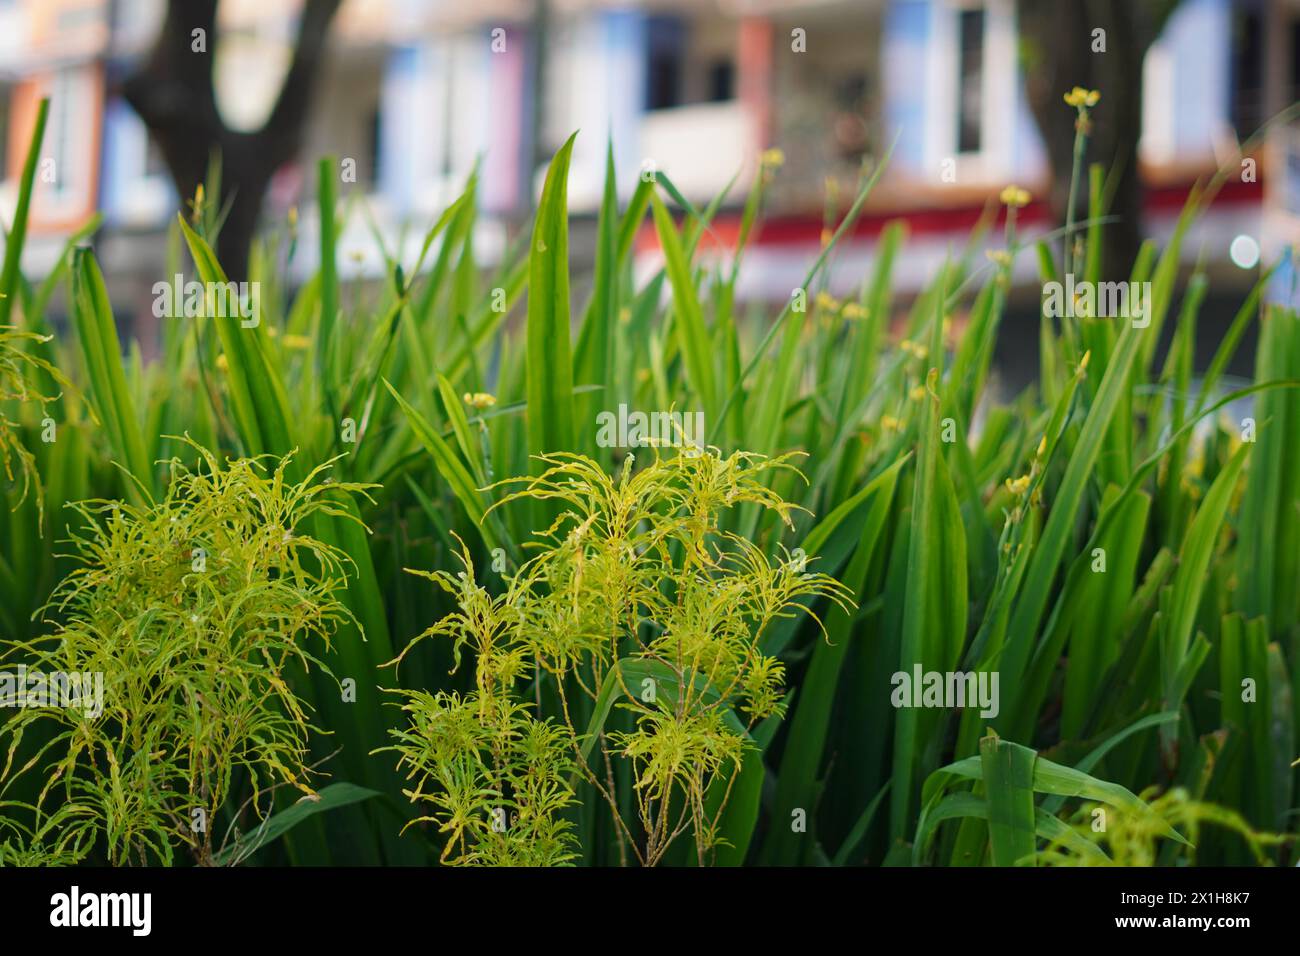 Plants with long grass-like shapes are green with other plants and a blurred background Stock Photo